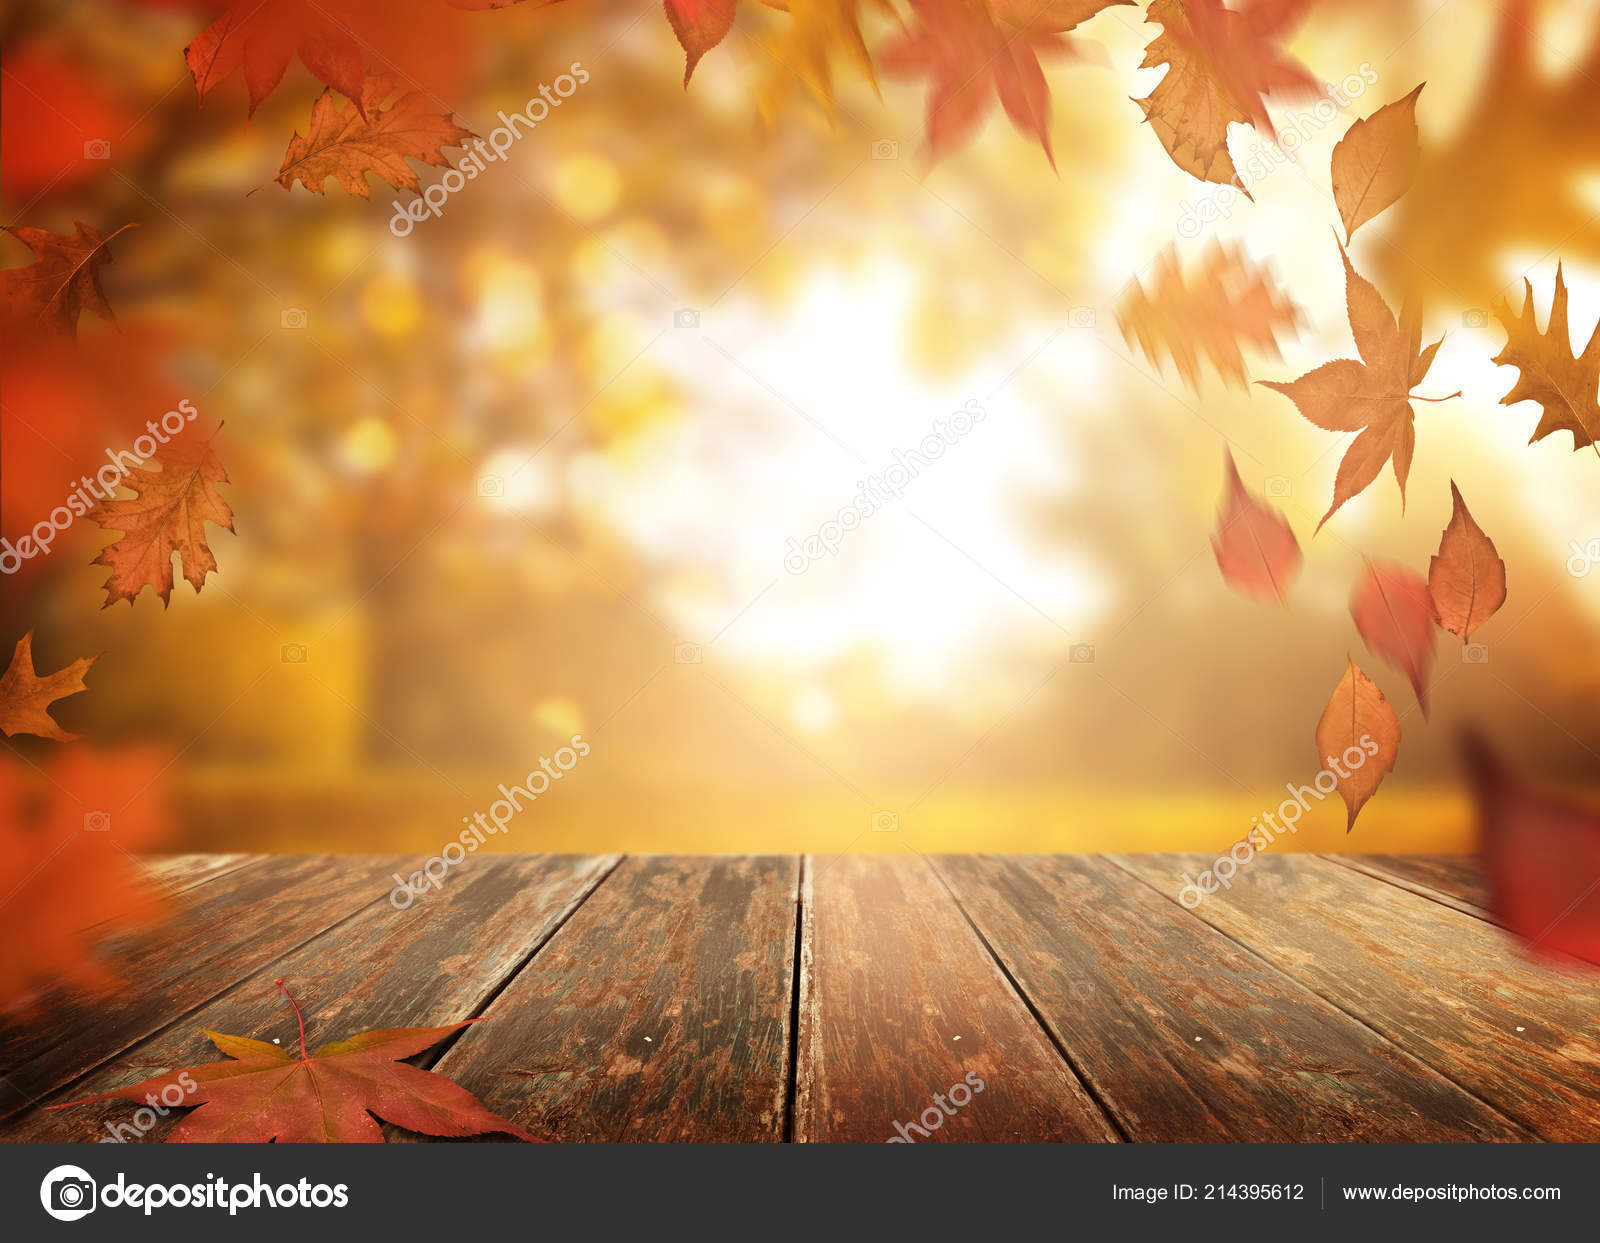 Autumn Season Falling Tree Leaves Wooden Table Background Stock Photo Image By C Solarseven